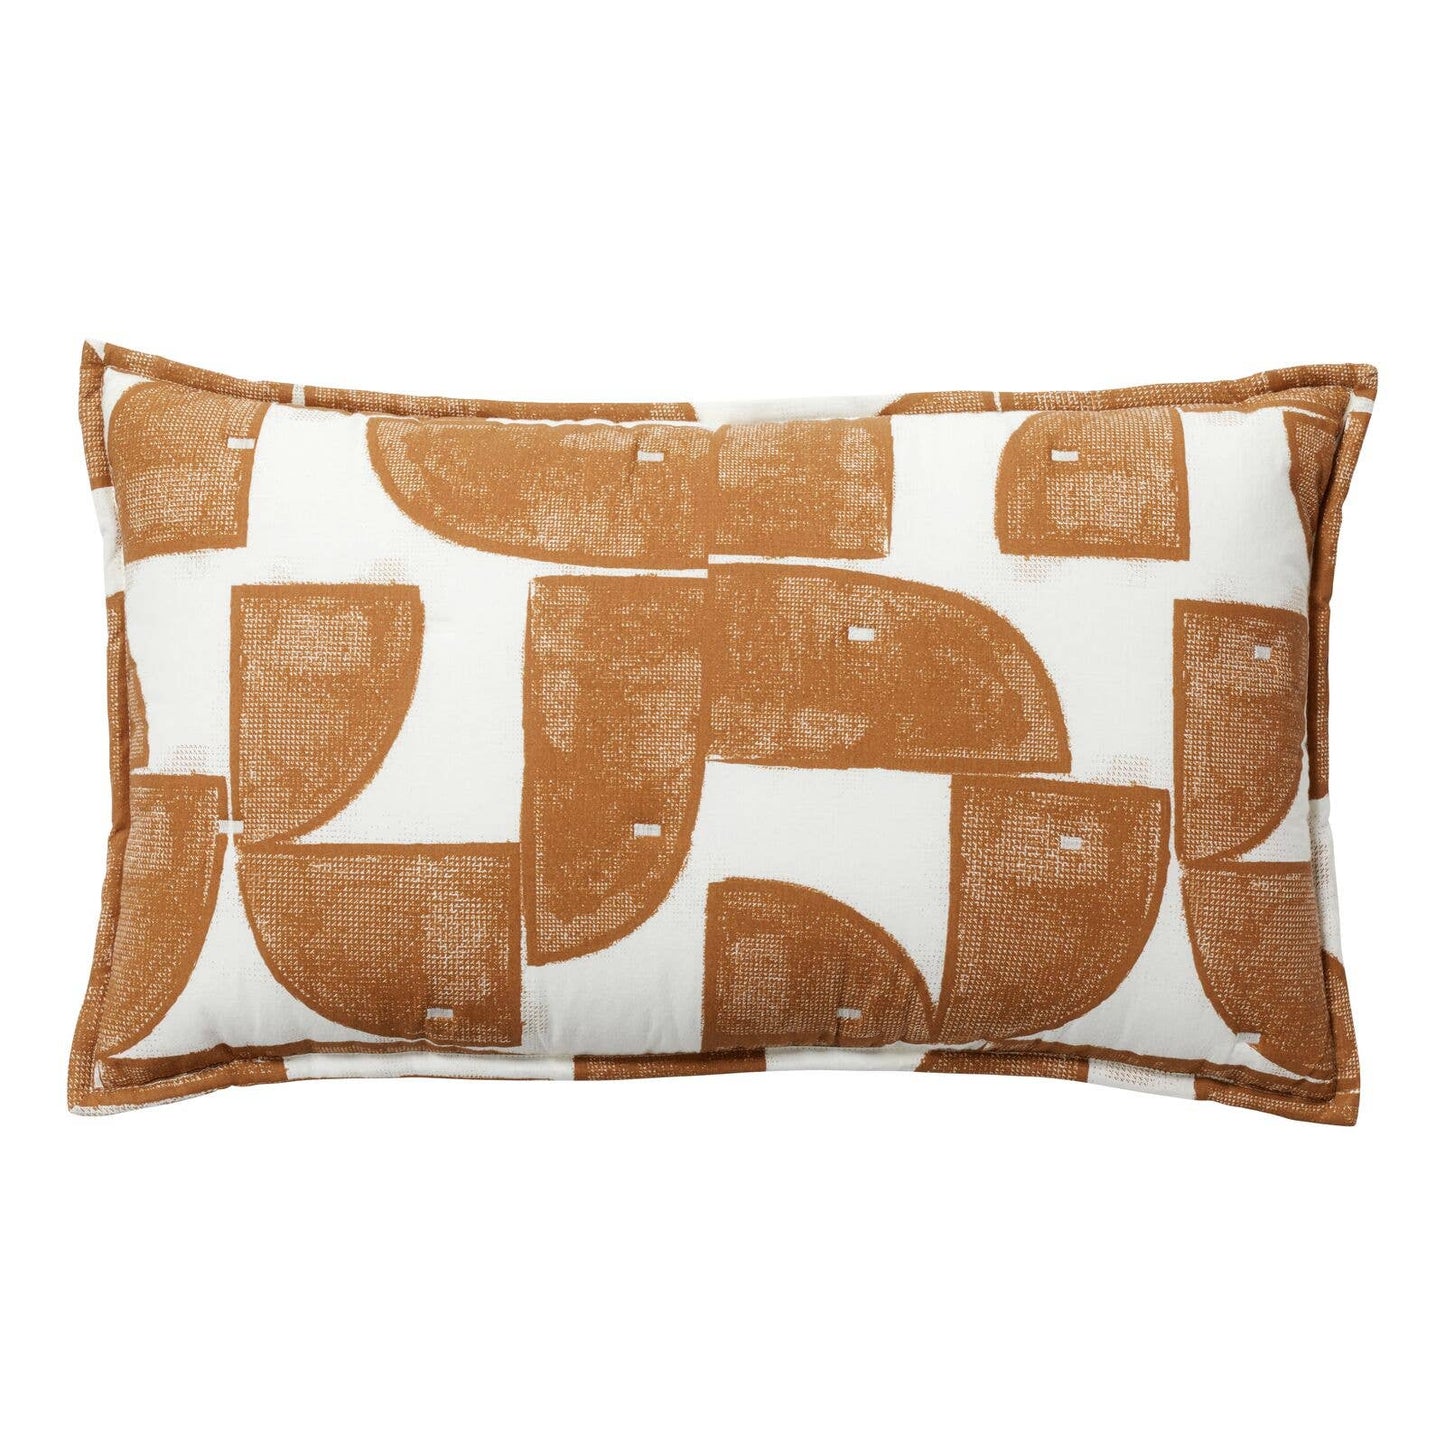 Nate Home by Nate Berkus Pr. Shape Pillow 14x24 Camel/Wht - Curated Home Decor